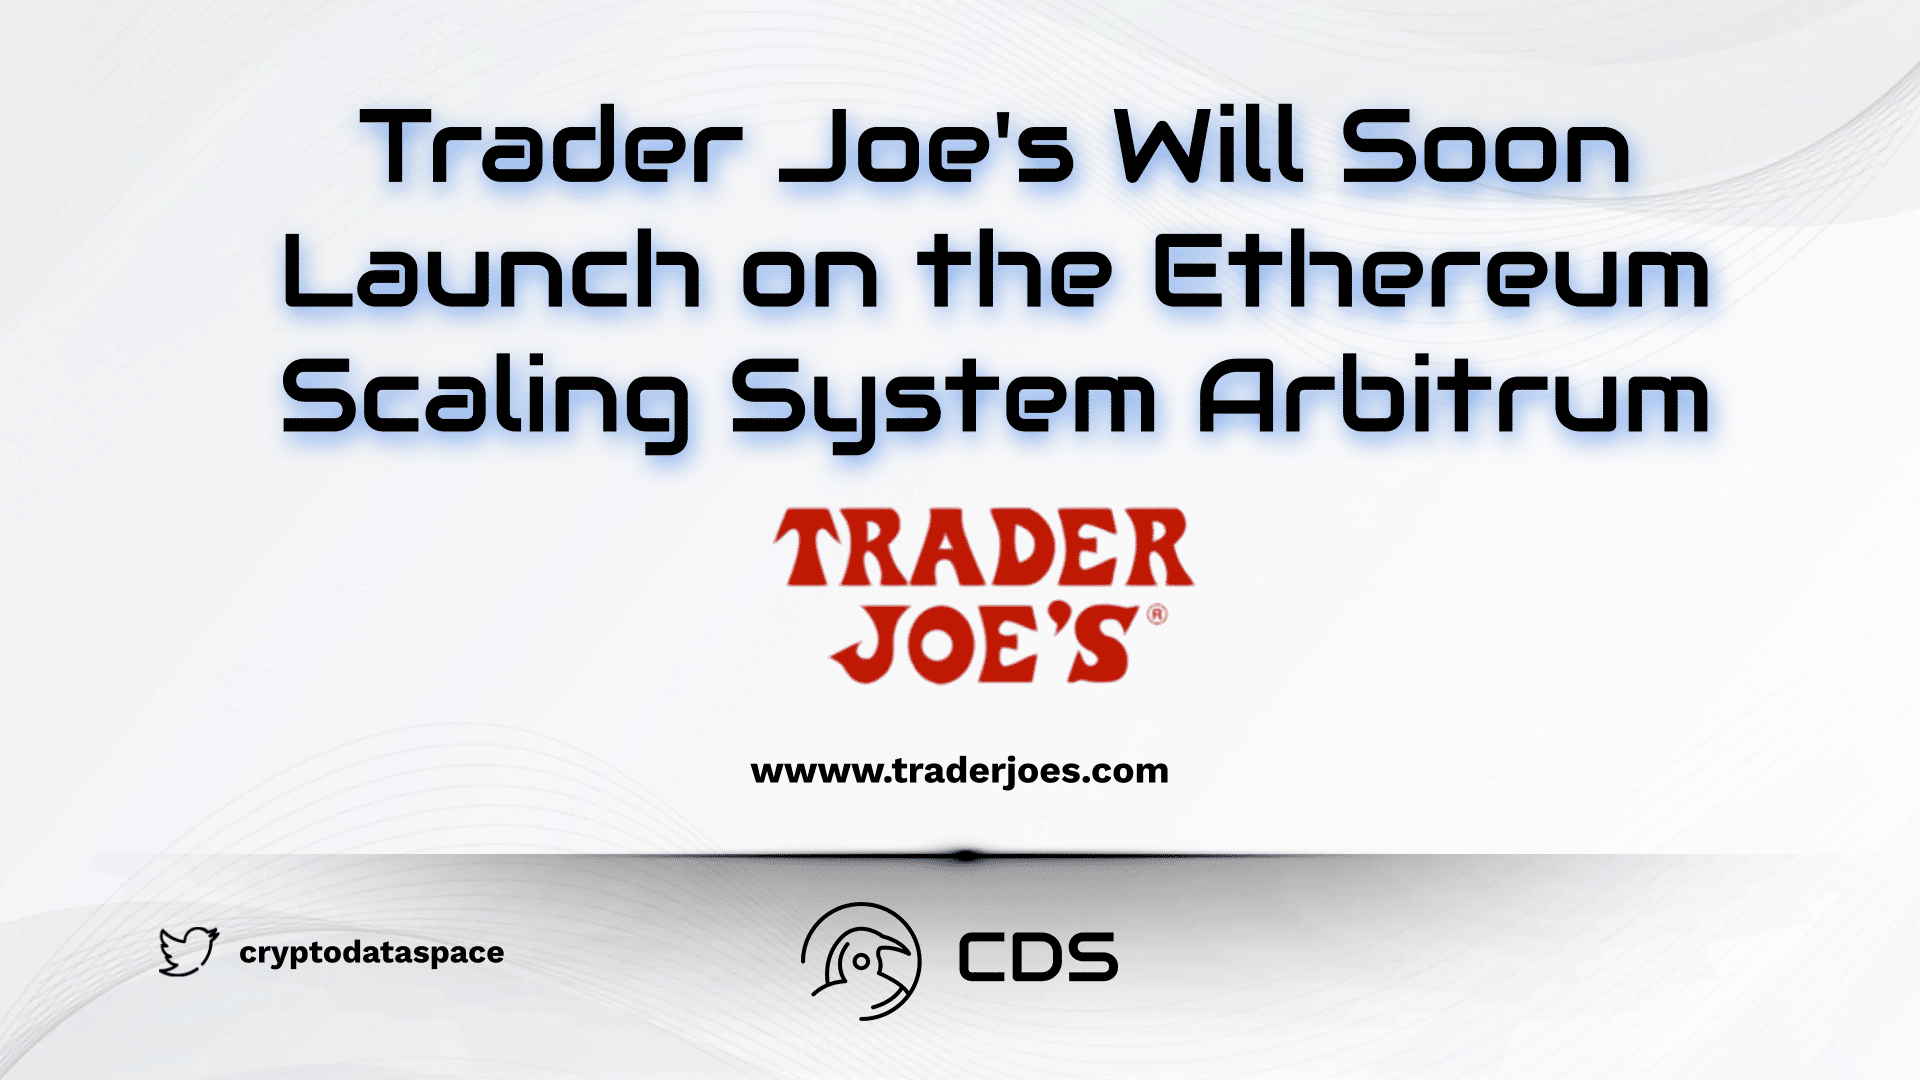 Trader Joe's Will Soon Launch on the Ethereum Scaling System Arbitrum